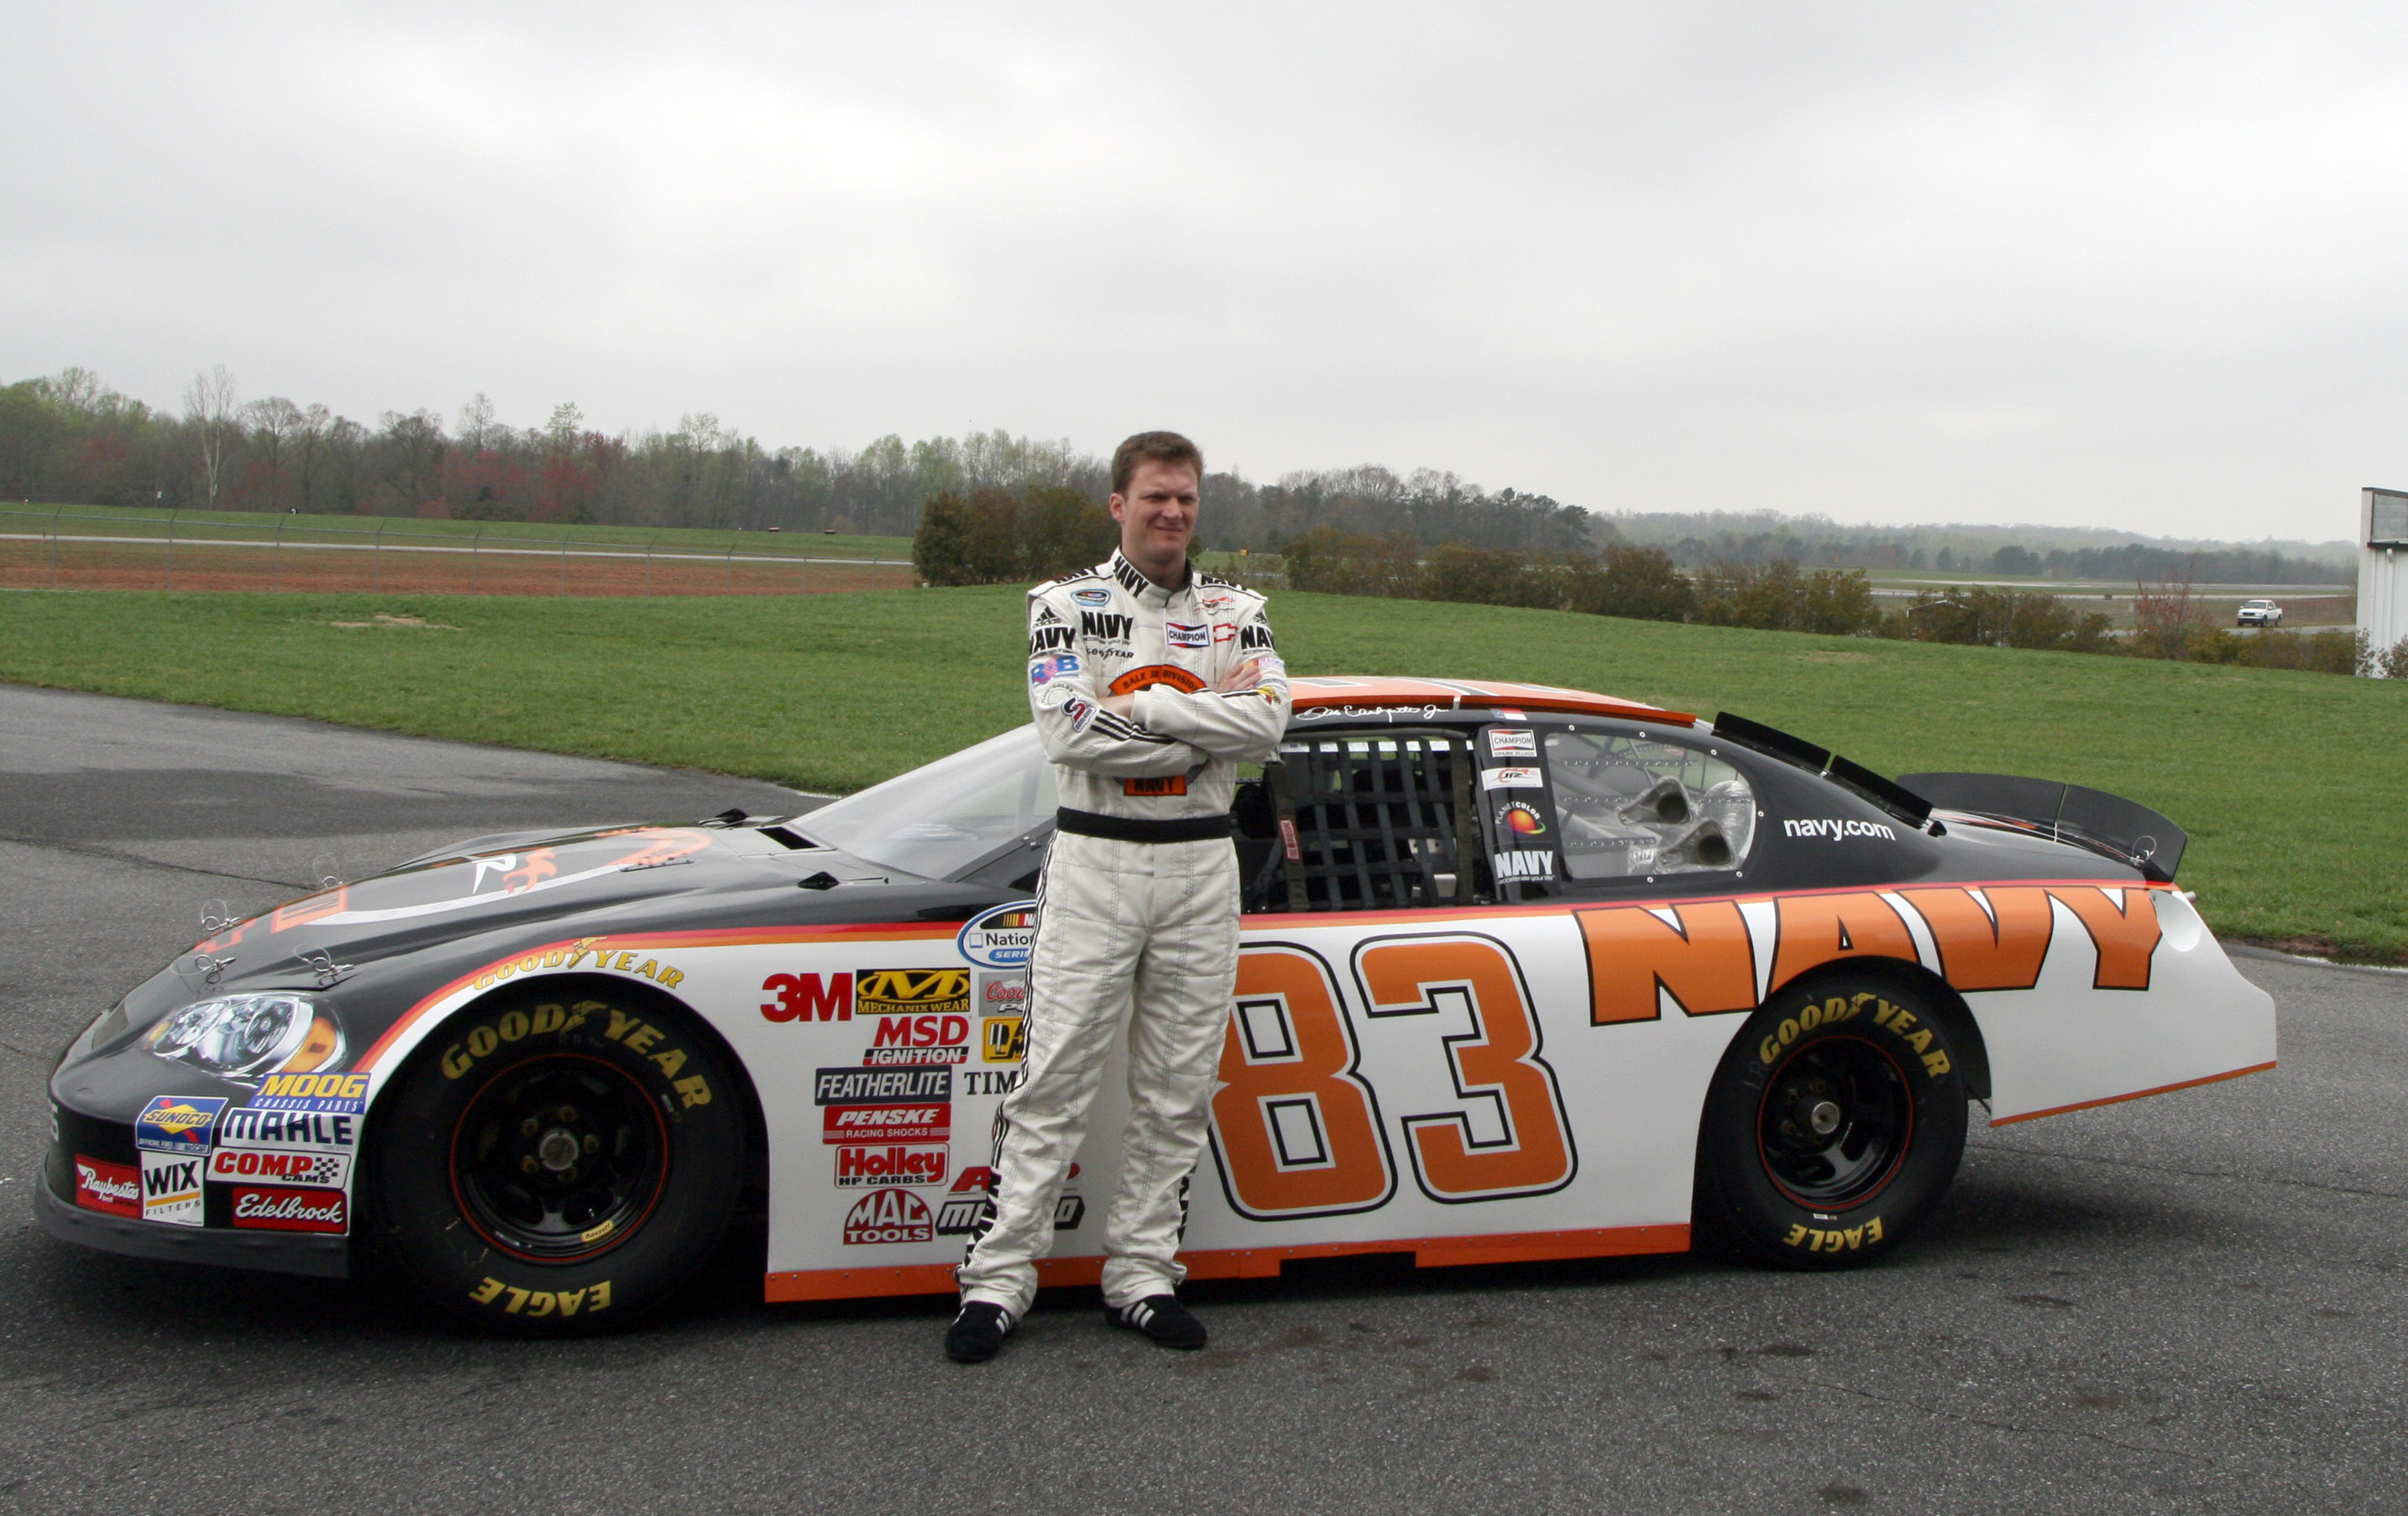 Dale_Earnhardt_Jr_with_Nationwide_Series_No_83_car.jpg